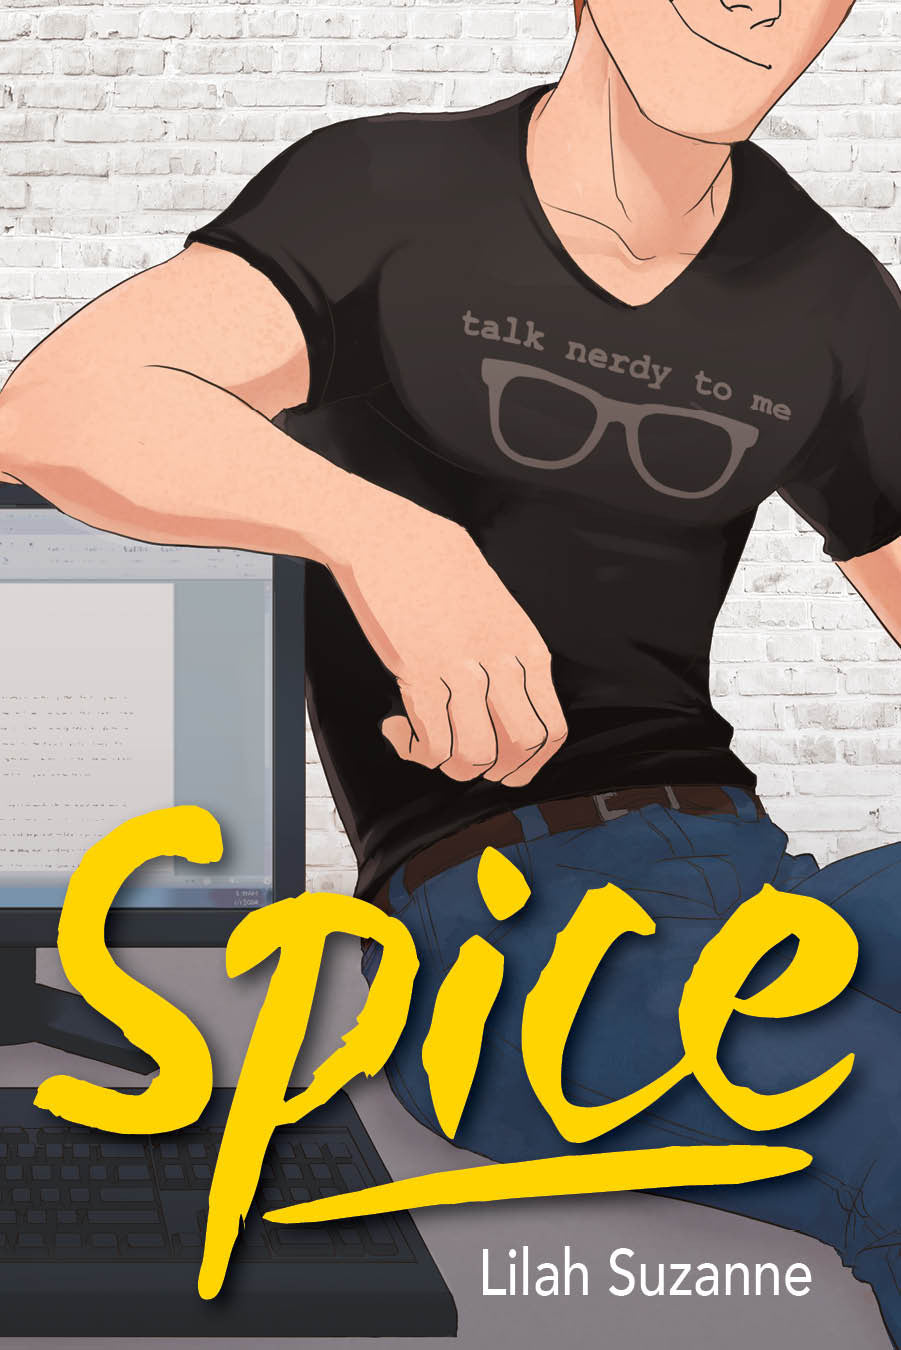 Spice by Lilah Suzanne (ebook package)